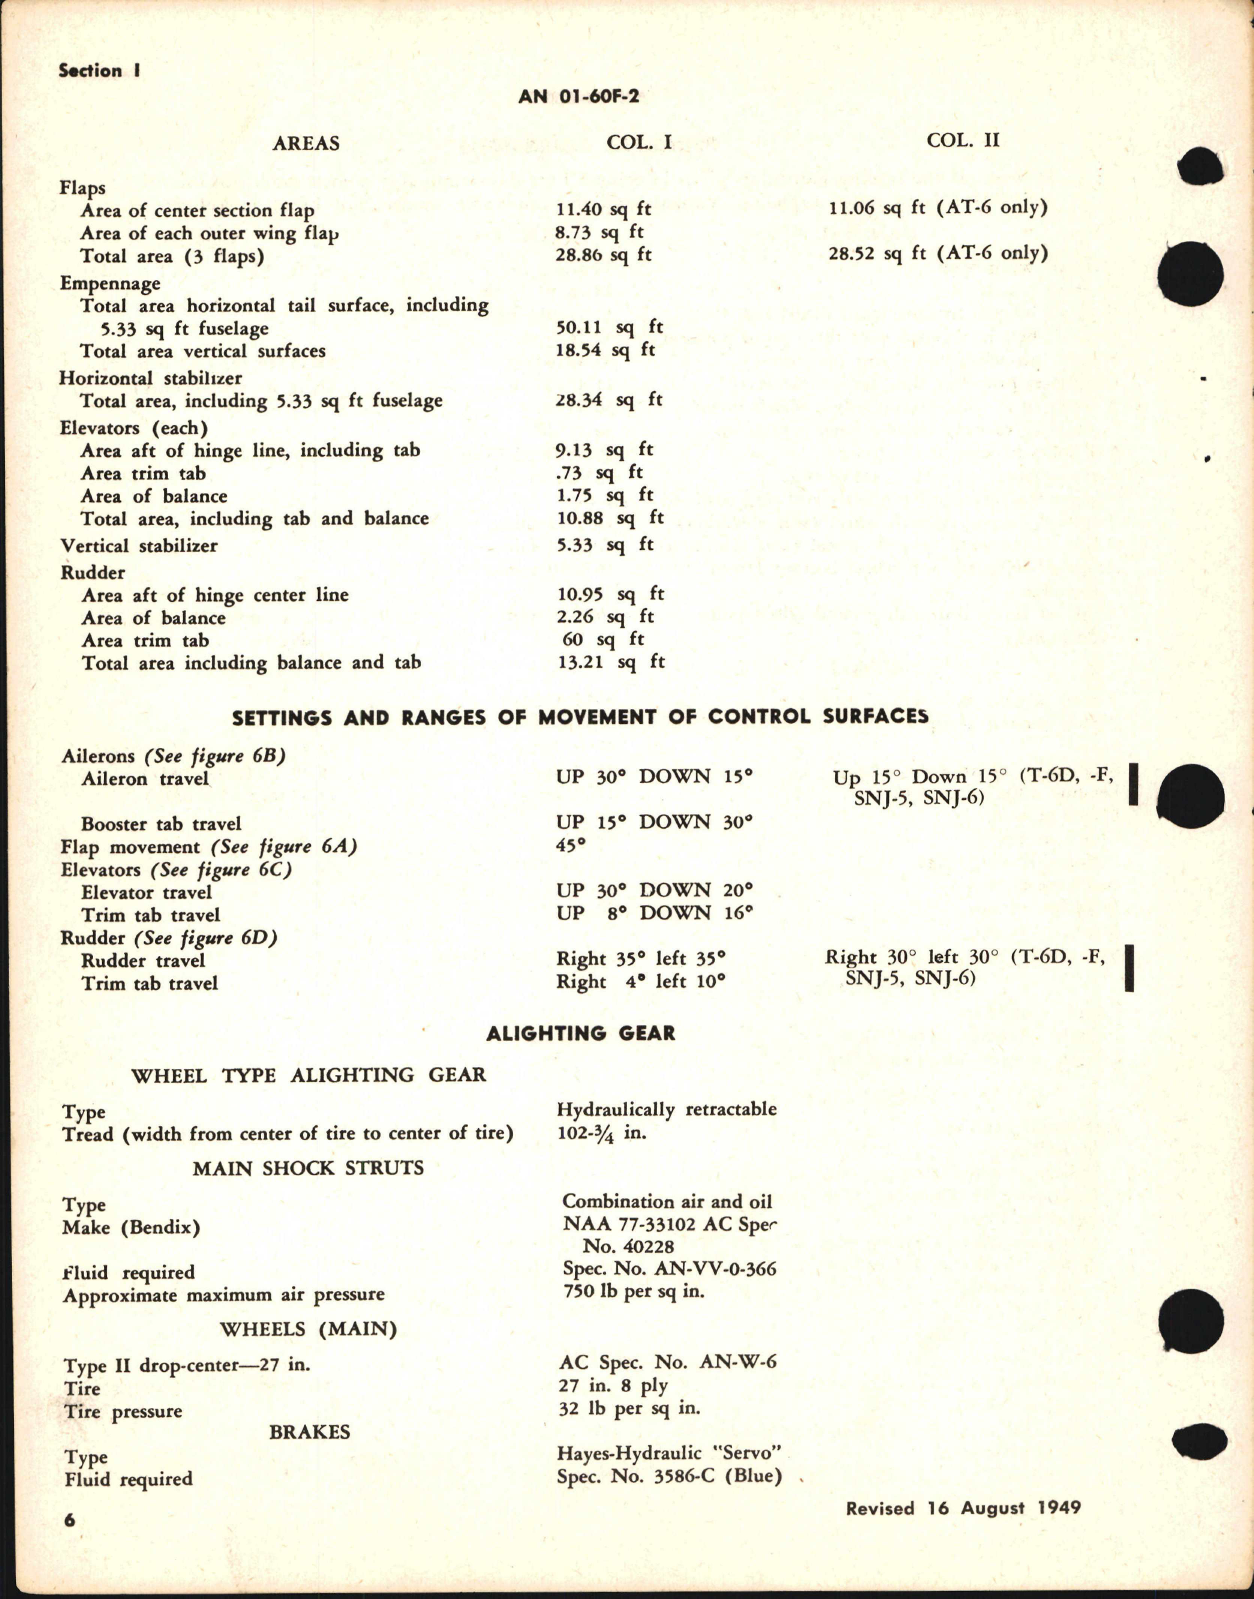 Sample page 6 from AirCorps Library document: Flight Operating Instructions for T-6D, T-6F, SNJ-5, and SNJ-6